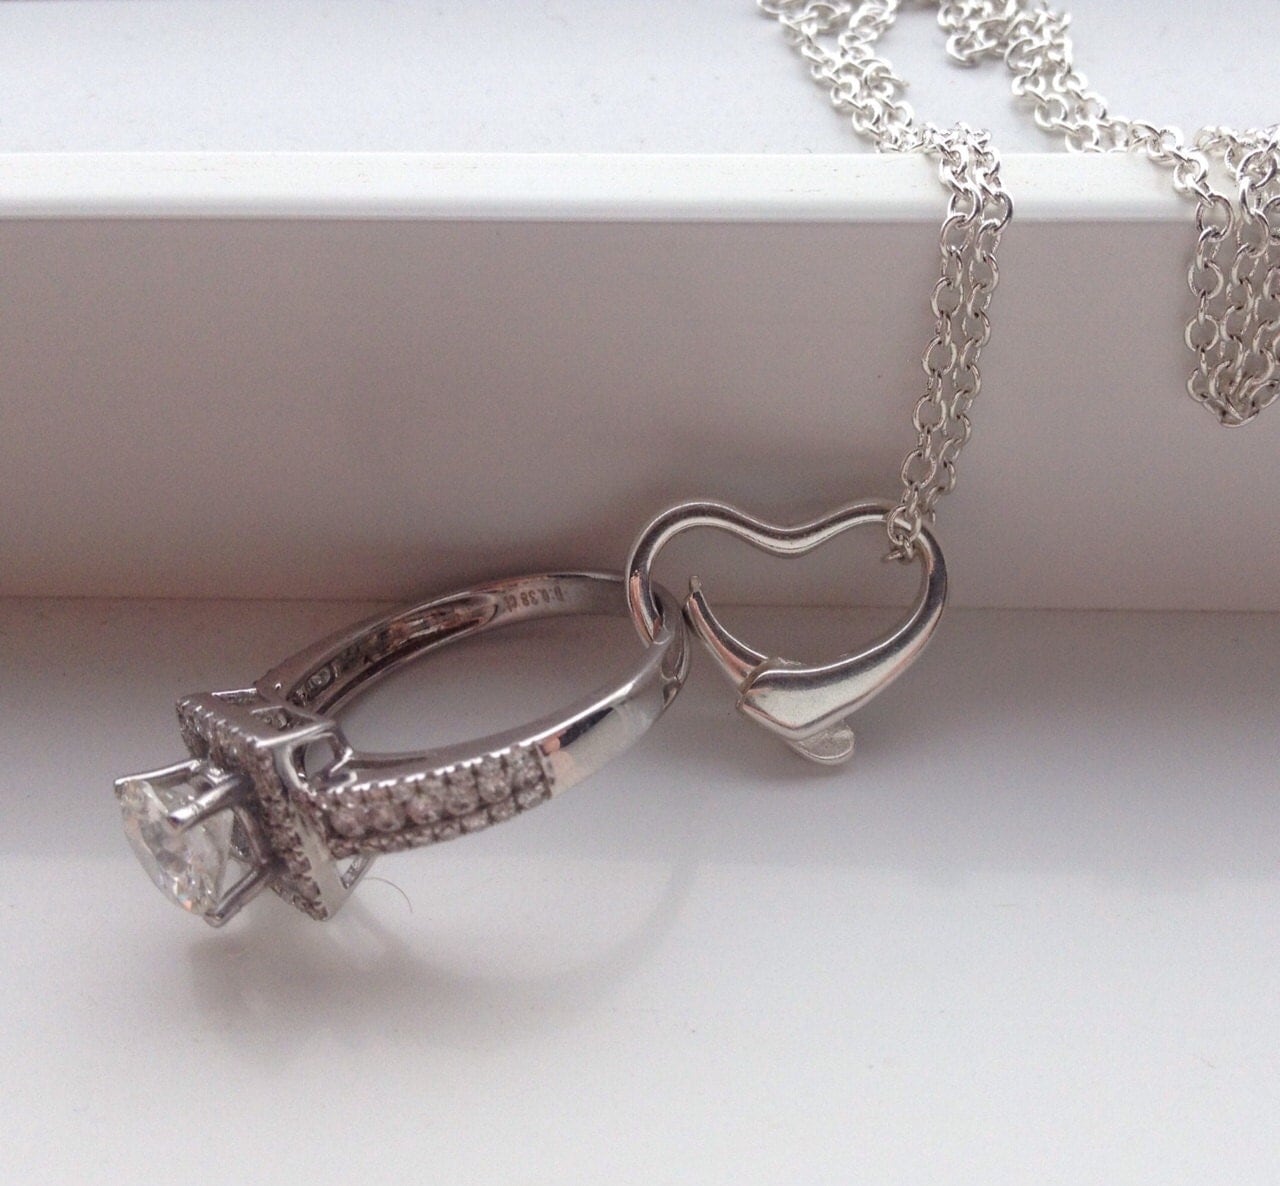 Pregnant wedding ring necklace